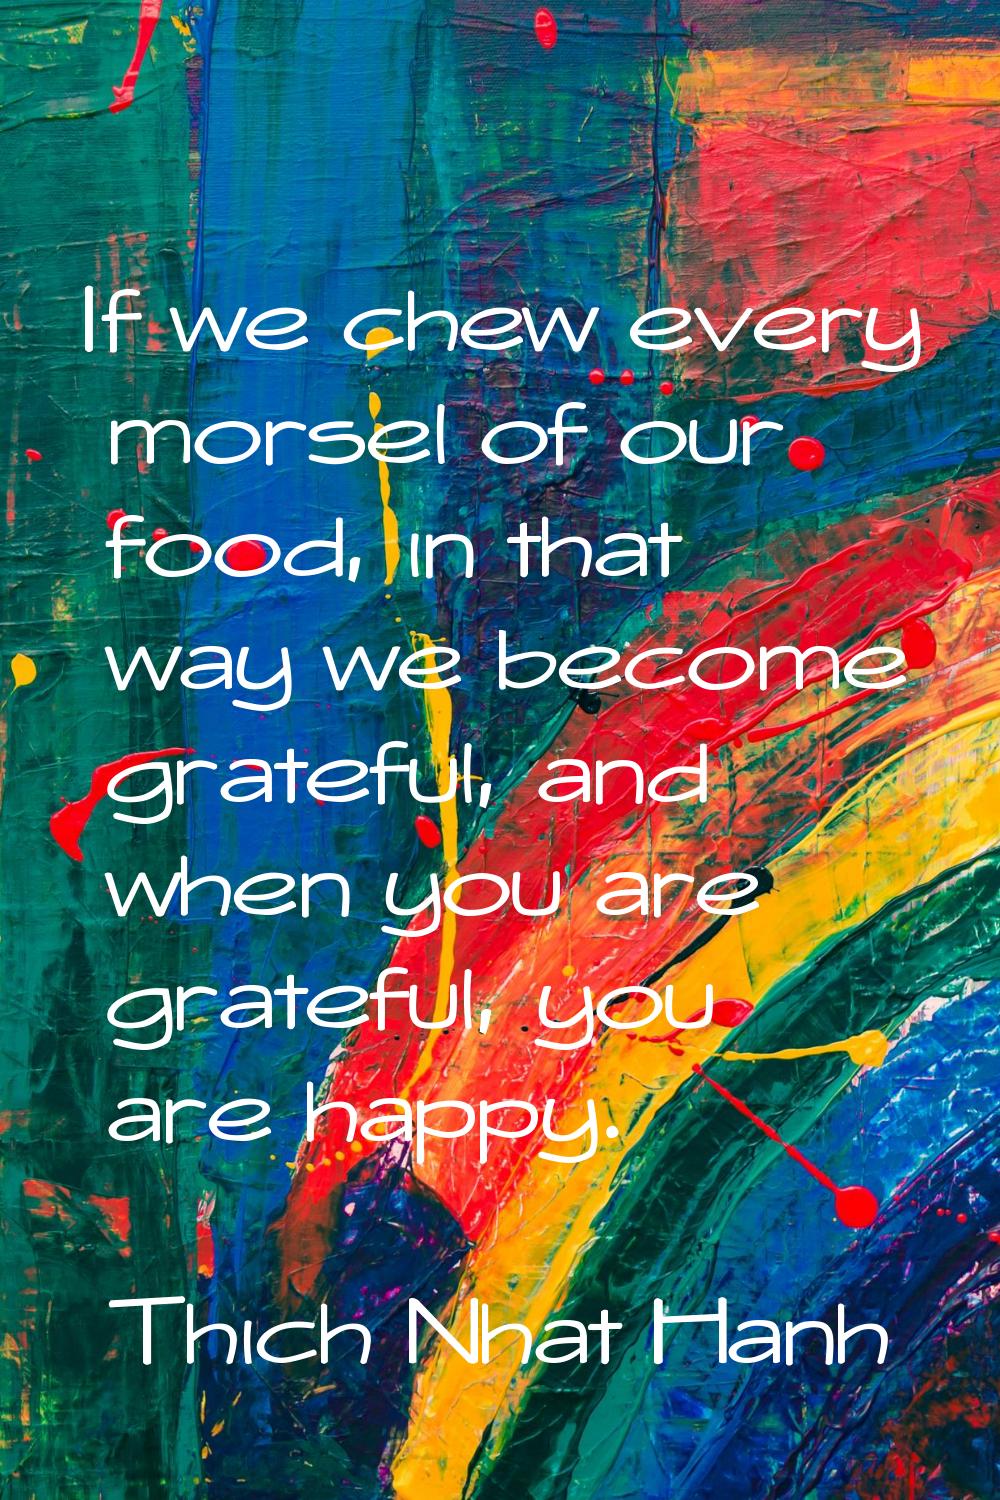 If we chew every morsel of our food, in that way we become grateful, and when you are grateful, you